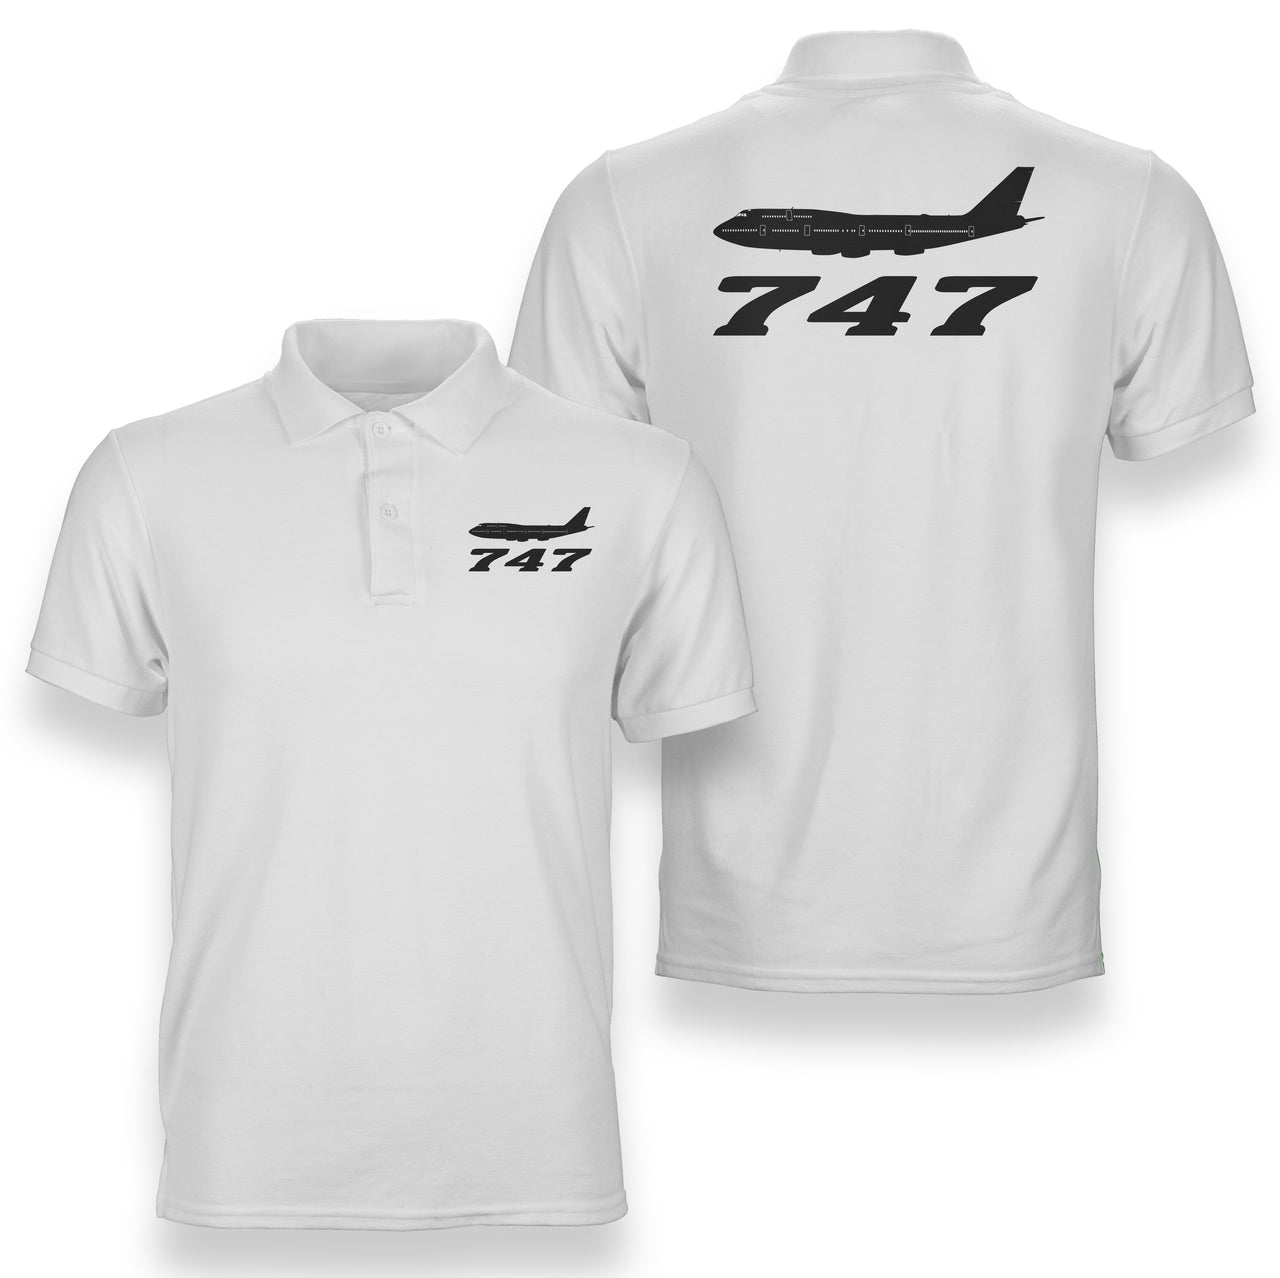 Special Boeing 747 Designed Double Side Polo T-Shirts